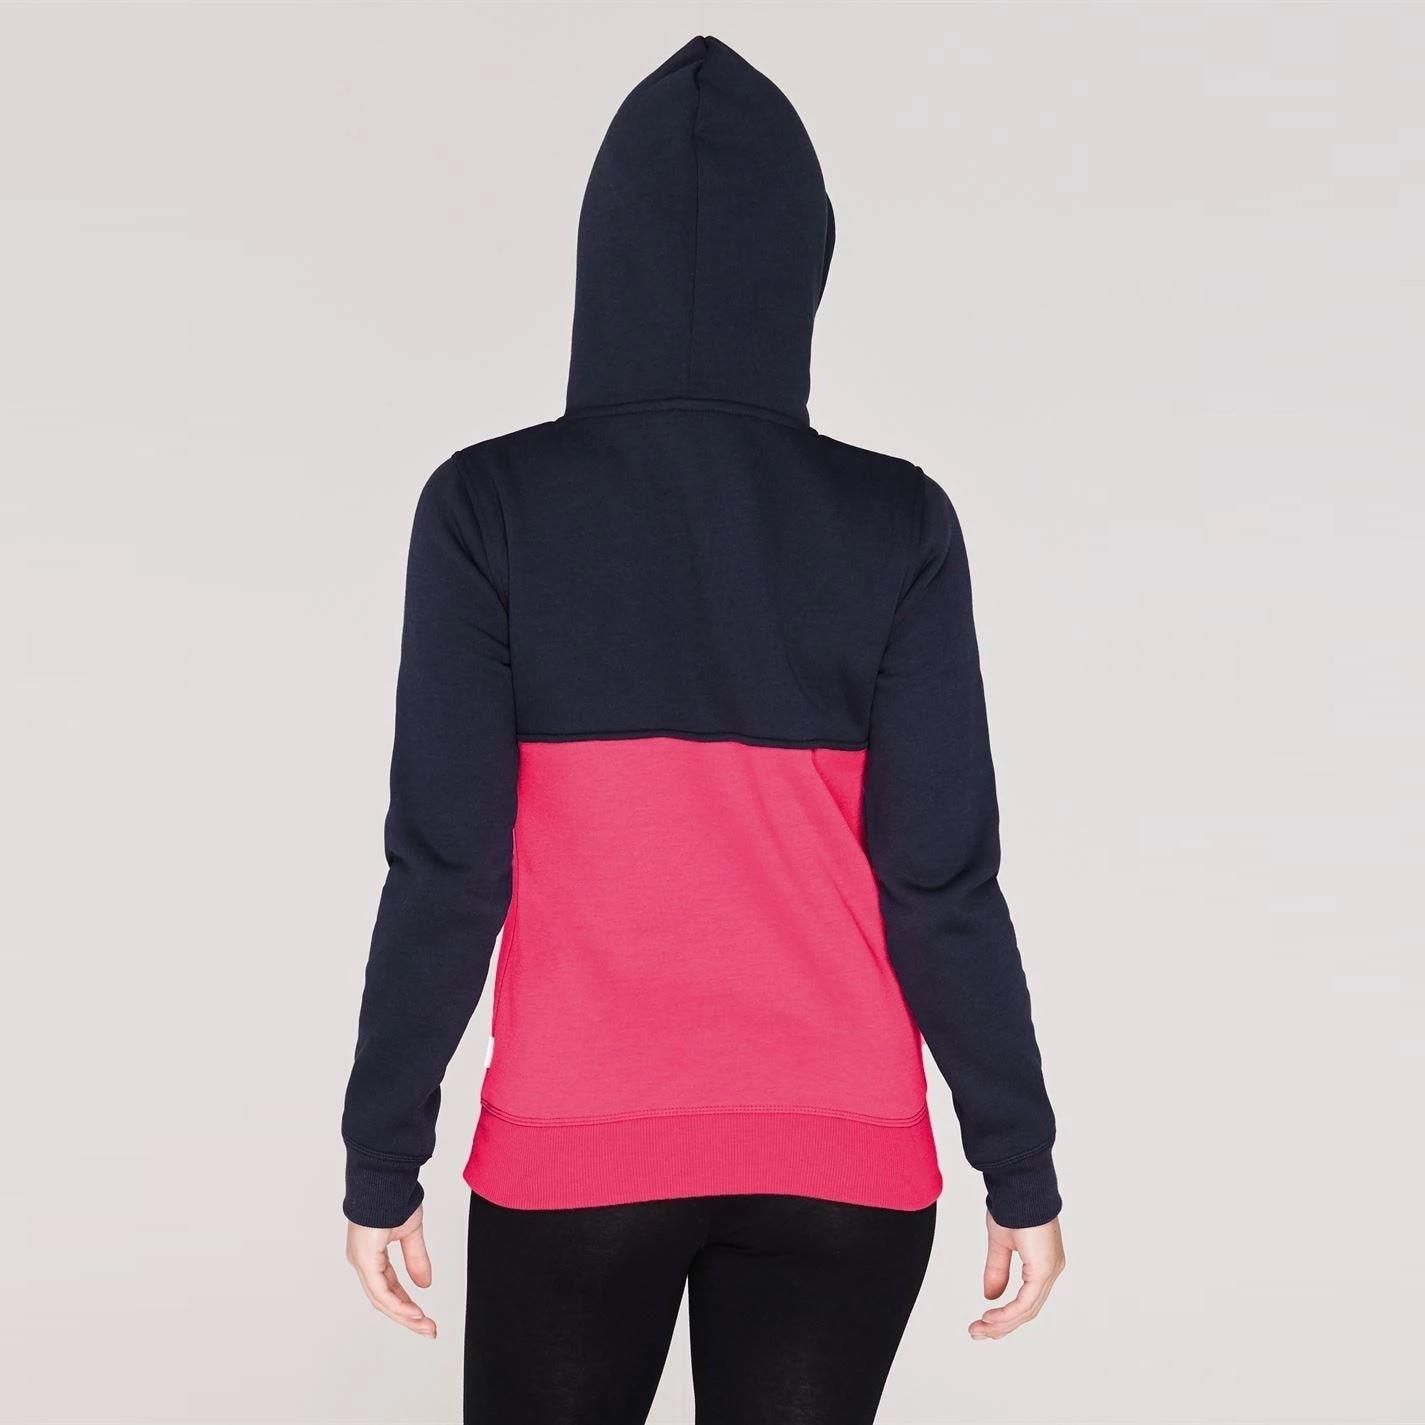 Lee Cooper Originals Ladies Cut and Sew OTH Hoodie.      
Lee Copper Embroidery Logo to the chest.      
Ribbed Hem, Cuffs.      
Colour Block Cut and Sew Design.      
Brushed Back Fleece.      
Two Side Pockets, Drawstring Hood.